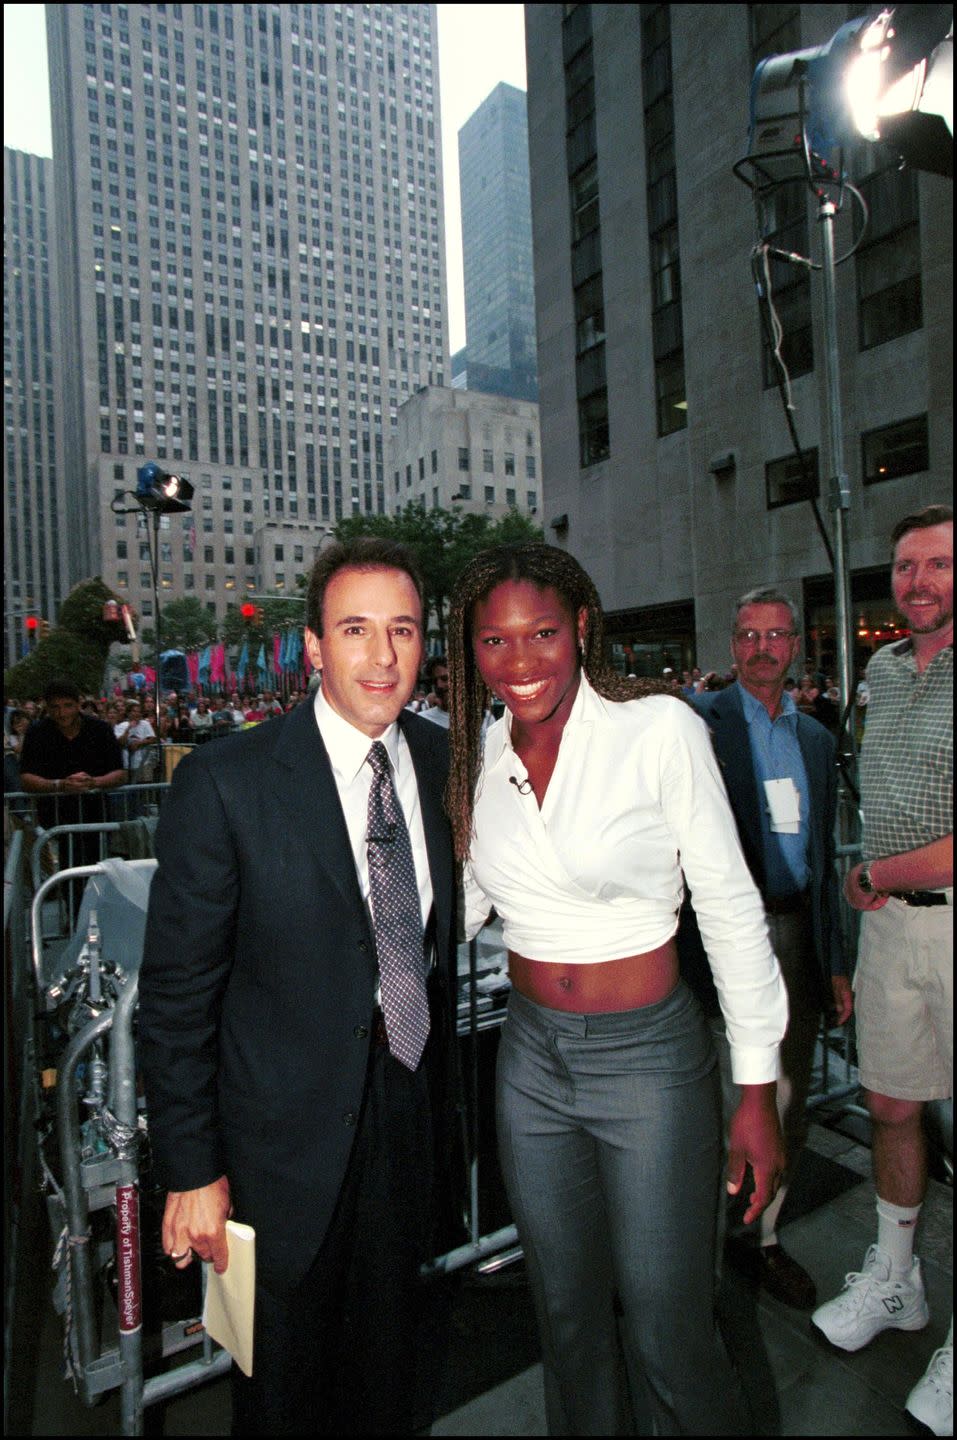 2000: A Young Serena Williams Poses With Matt Lauer